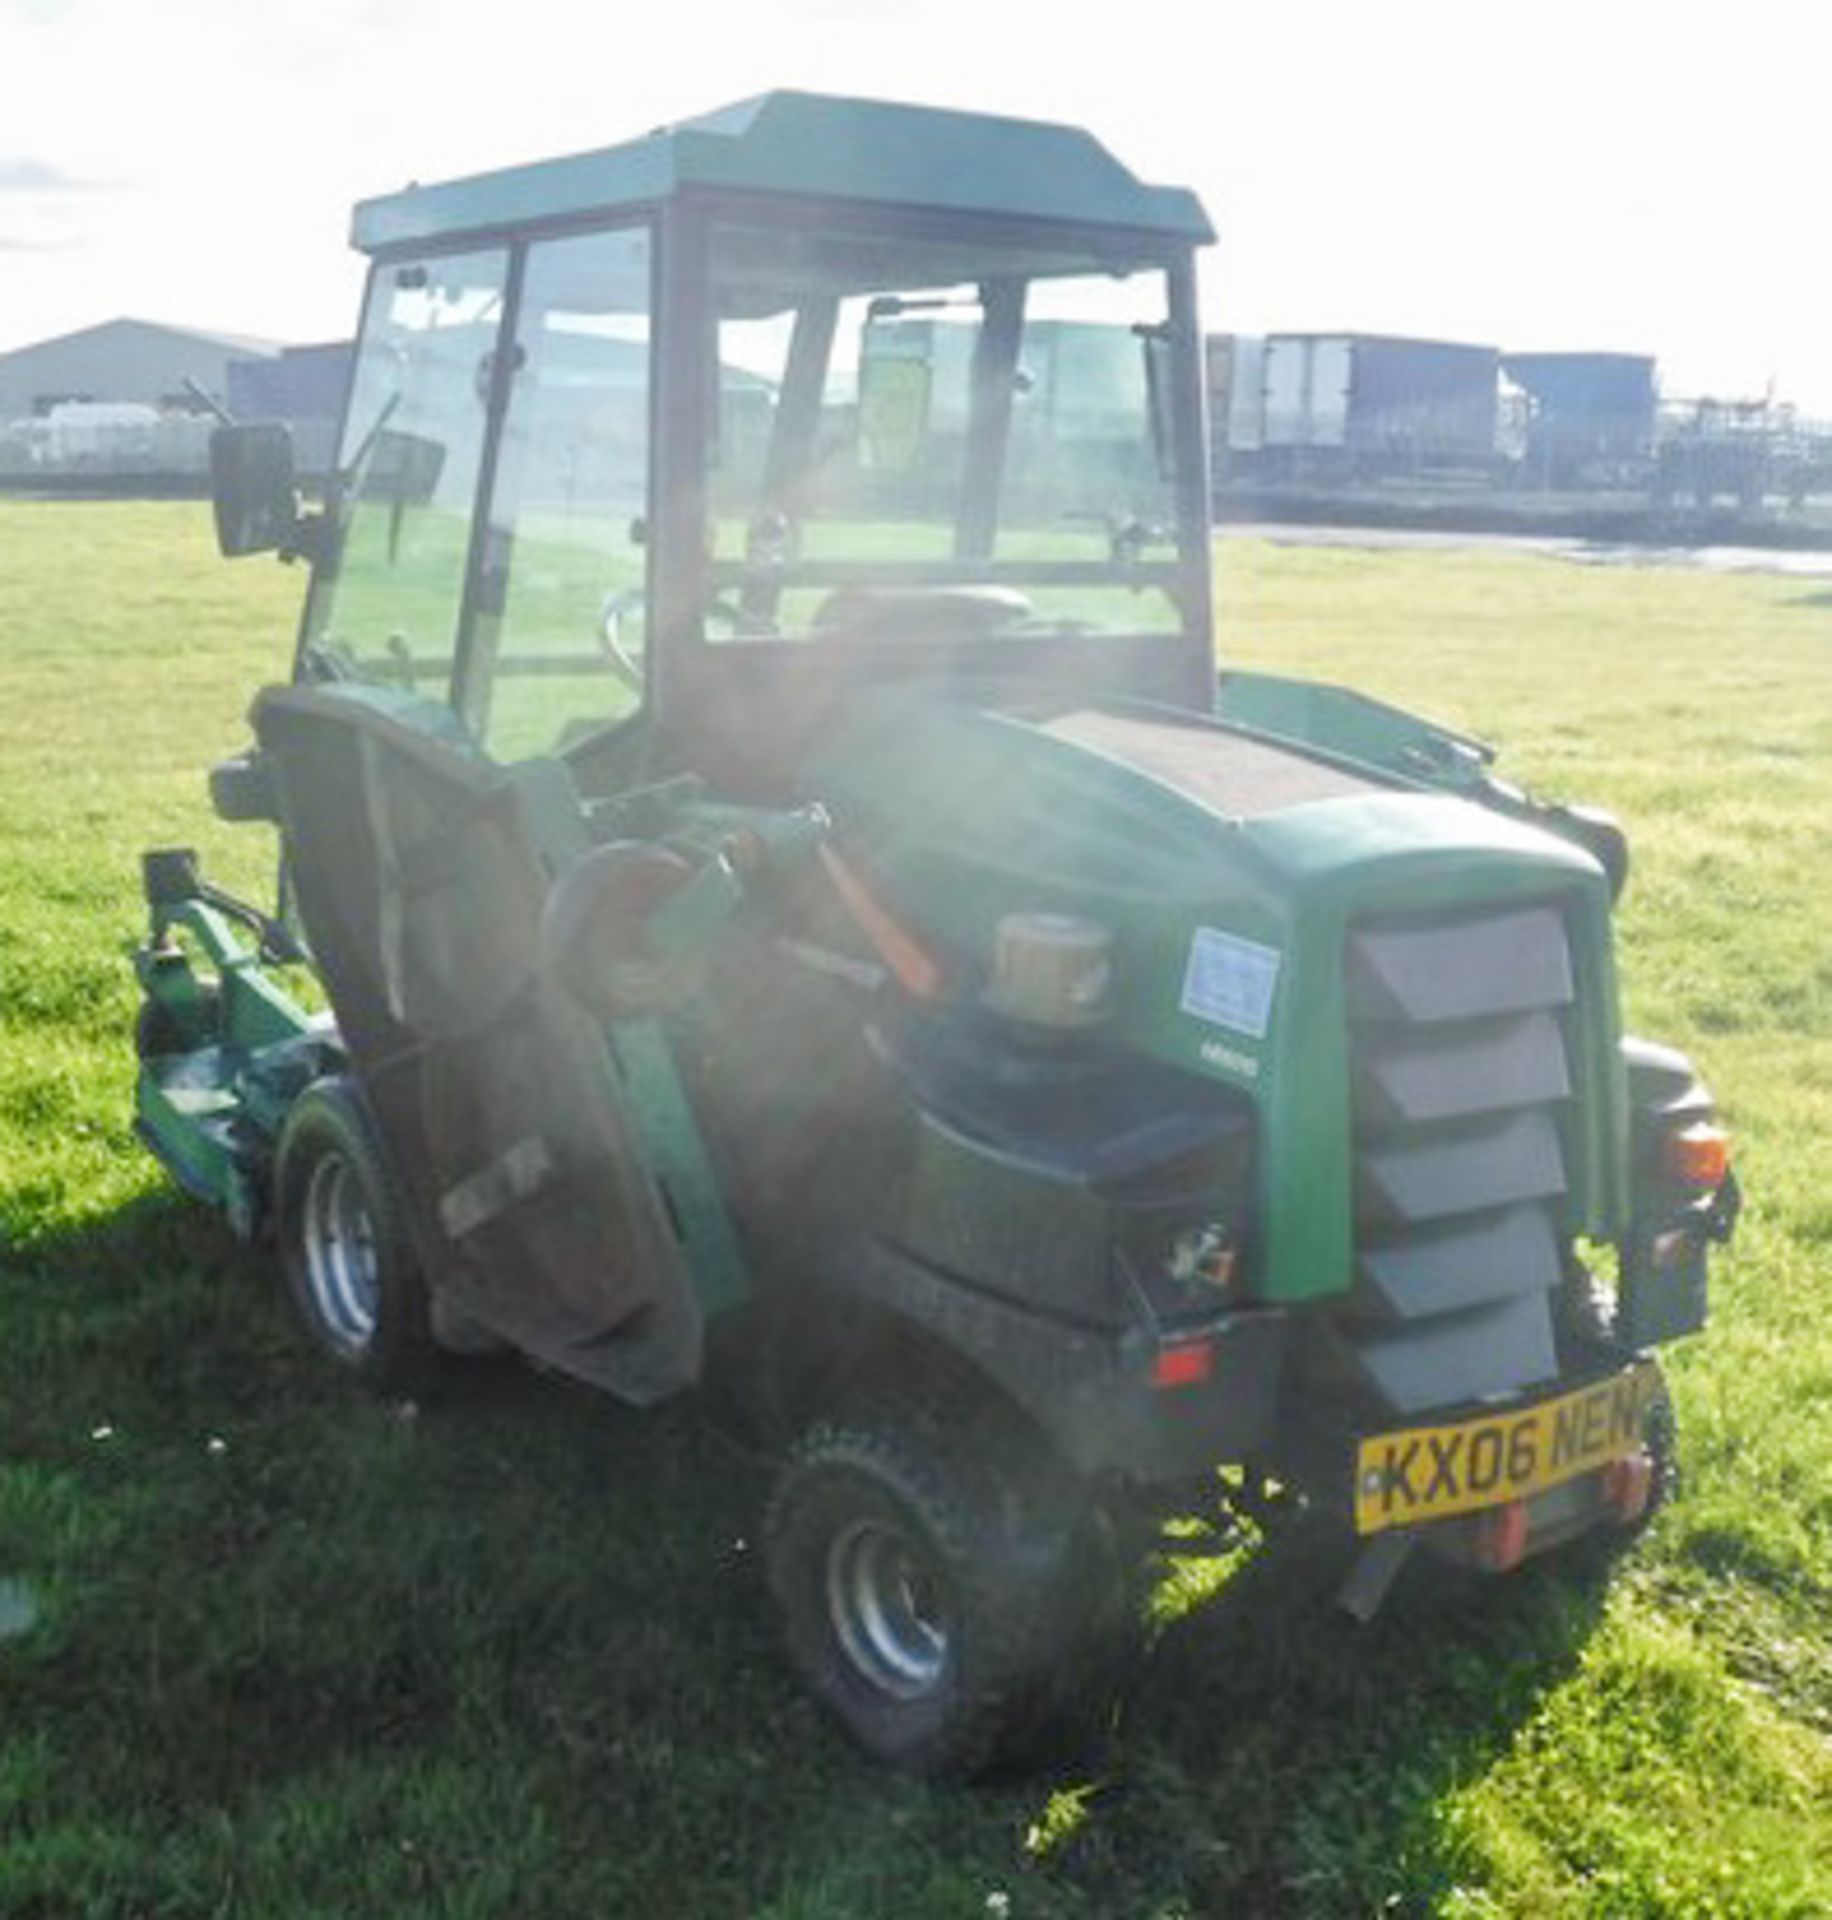 2006 RANSOME HF6010 BATWING ROTARY MOWER, CUTS APPROX 10FT 6INCHS, PERKINS 6 CYLINDER ENGINE, REG KX - Image 12 of 14